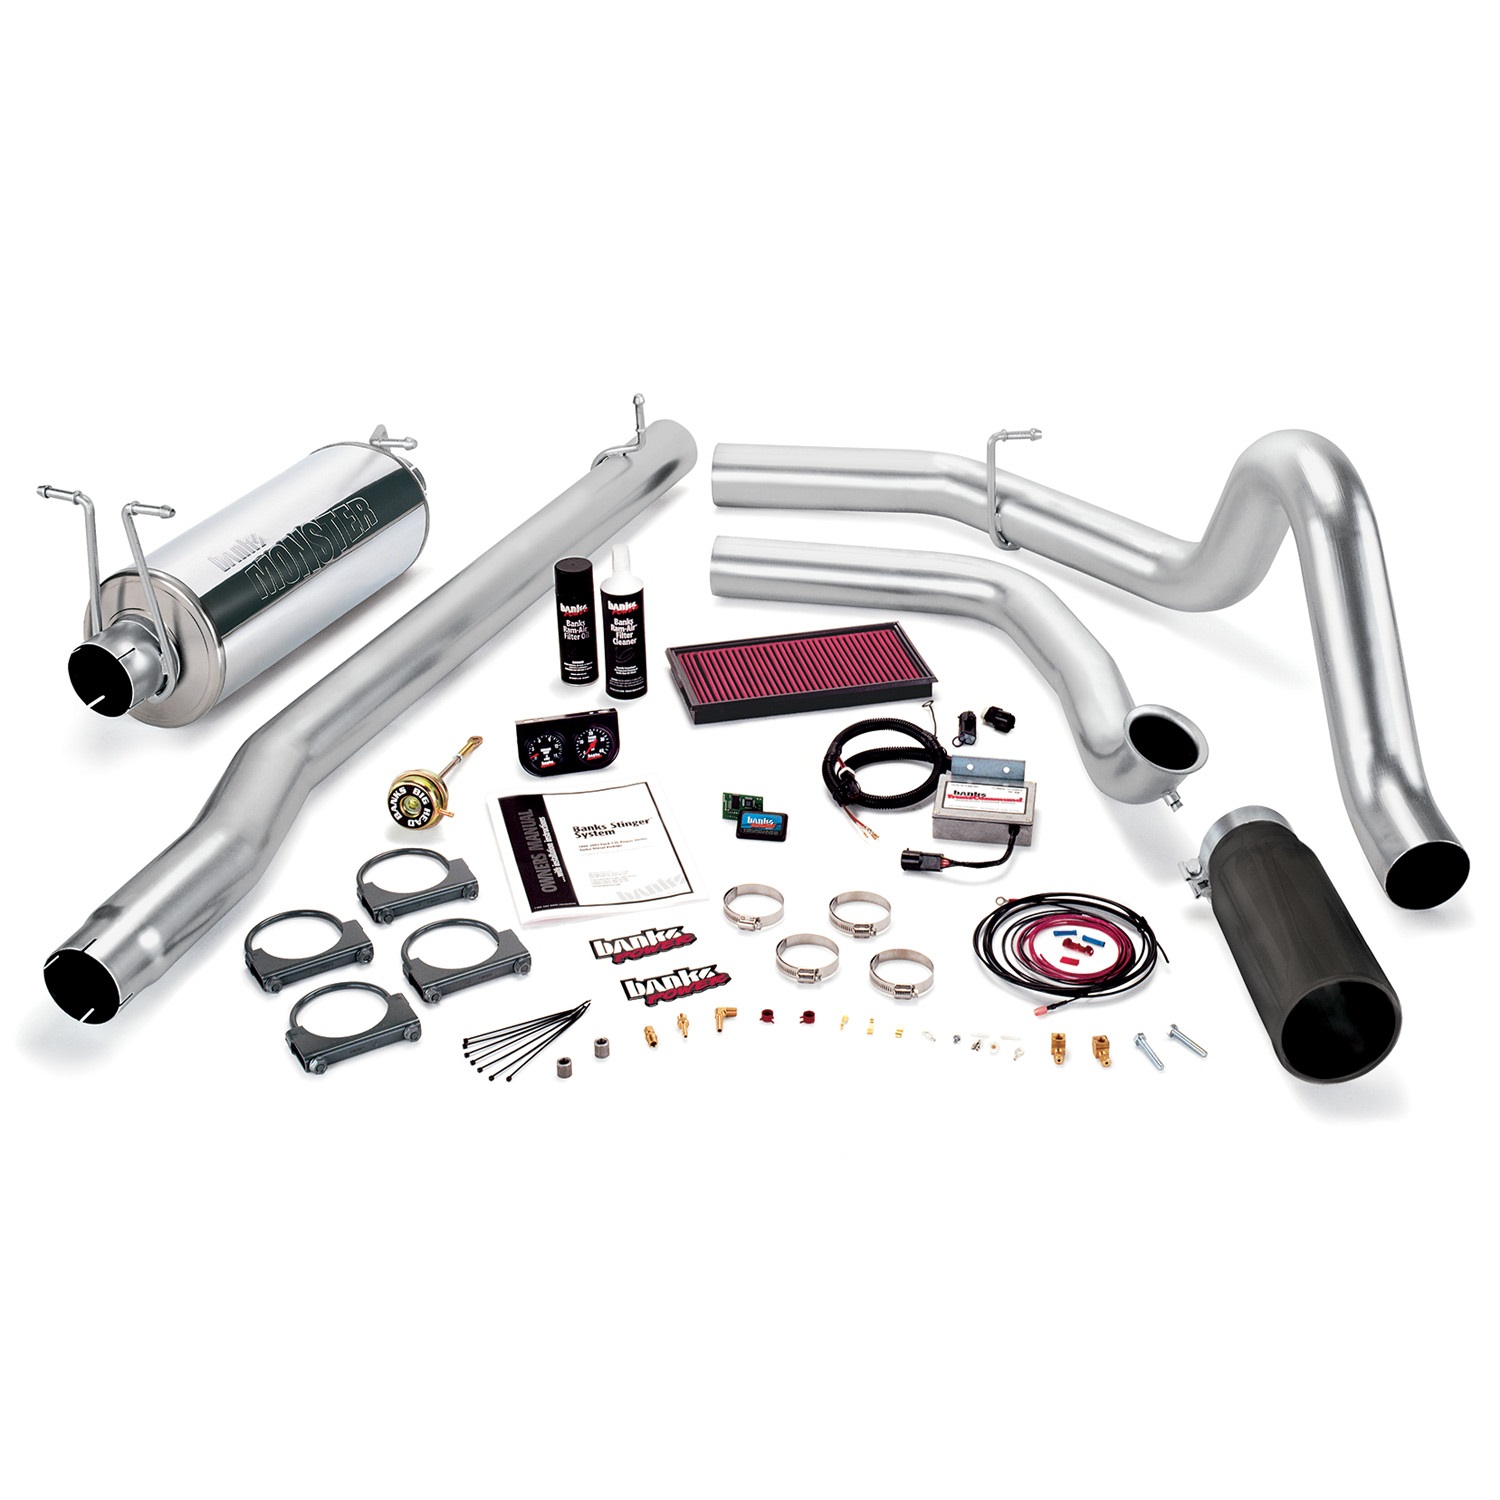 Banks Power 47548-B Single Exhaust Stinger Sys for 99.5-03 Ford - Click Image to Close